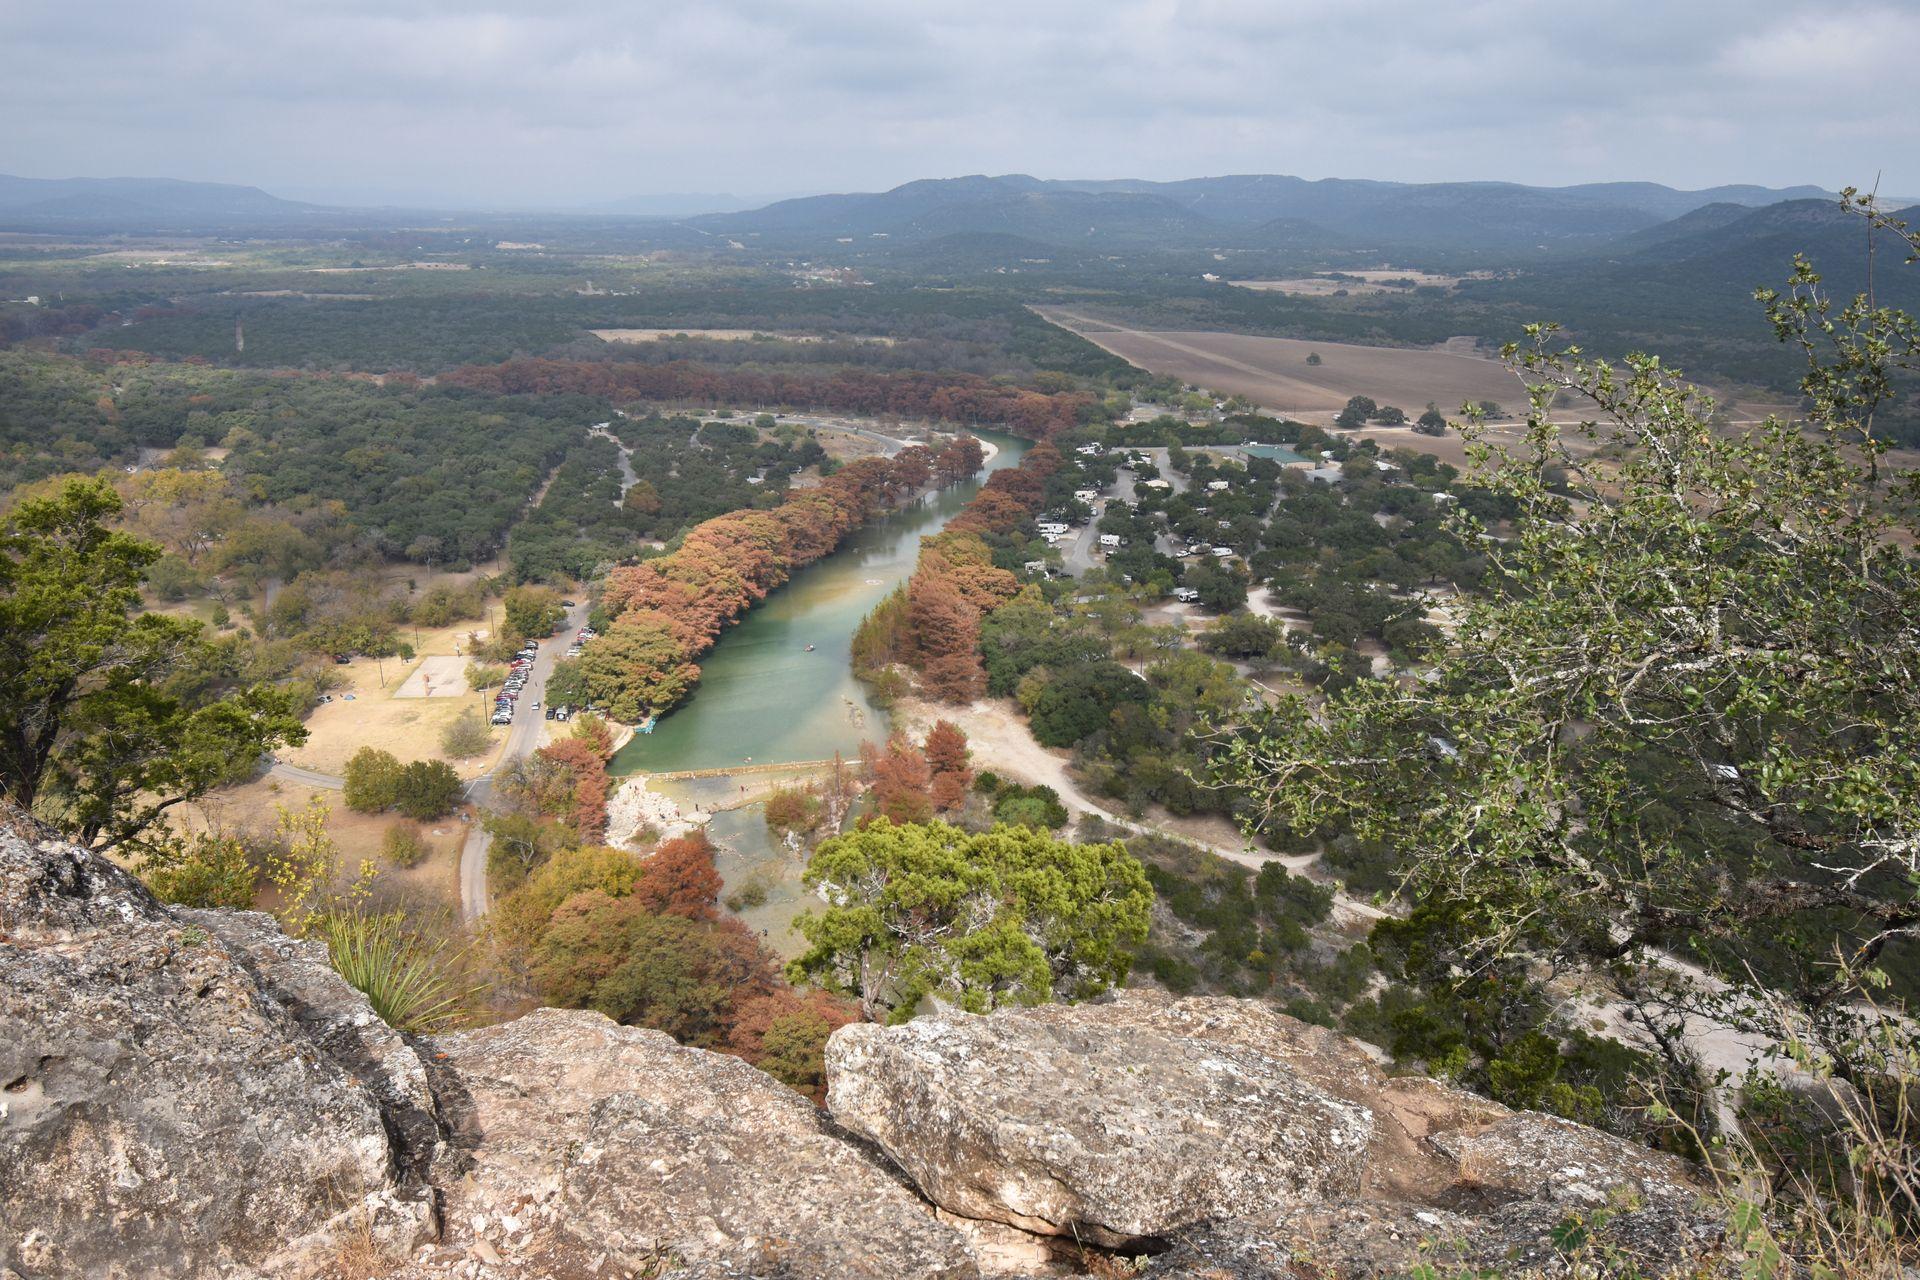 A view of the Frio River from Mt Baldy in Garner State Park.